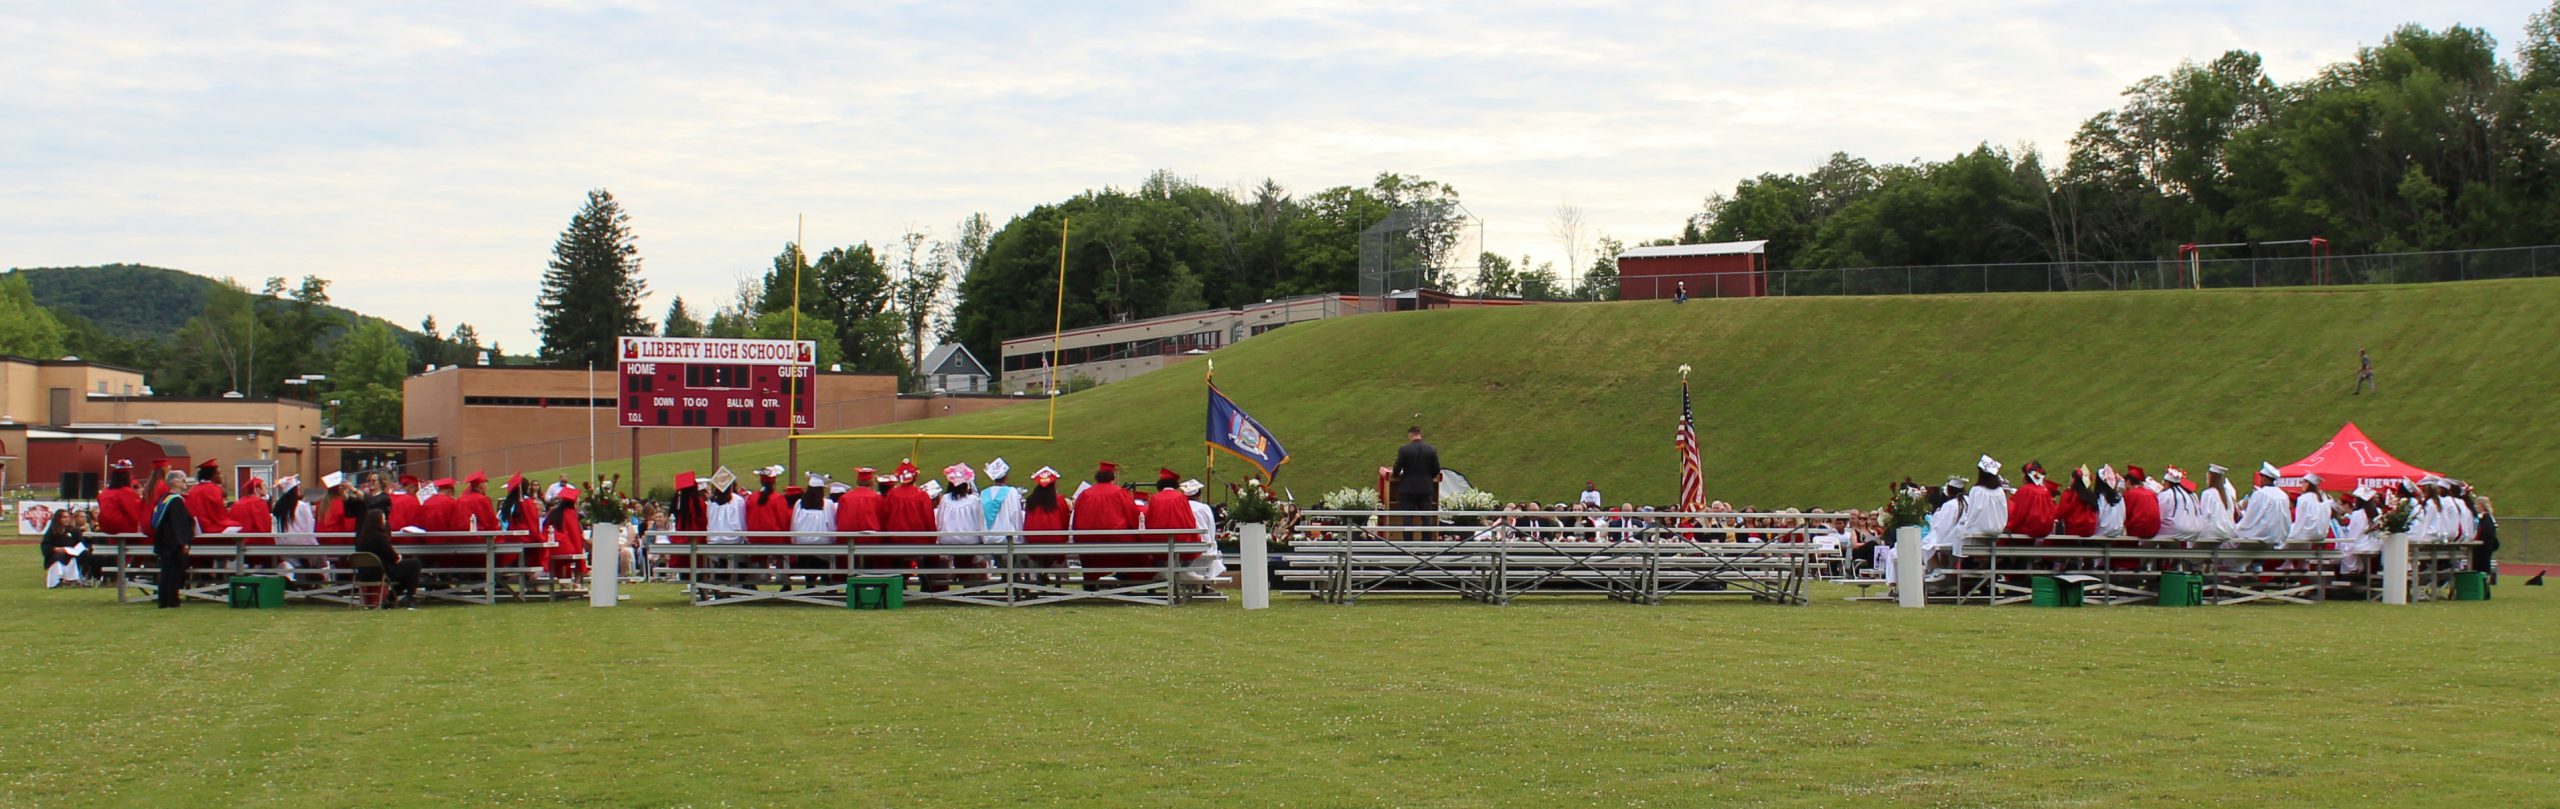 Graduates sit on bleachers, as seen from the back.